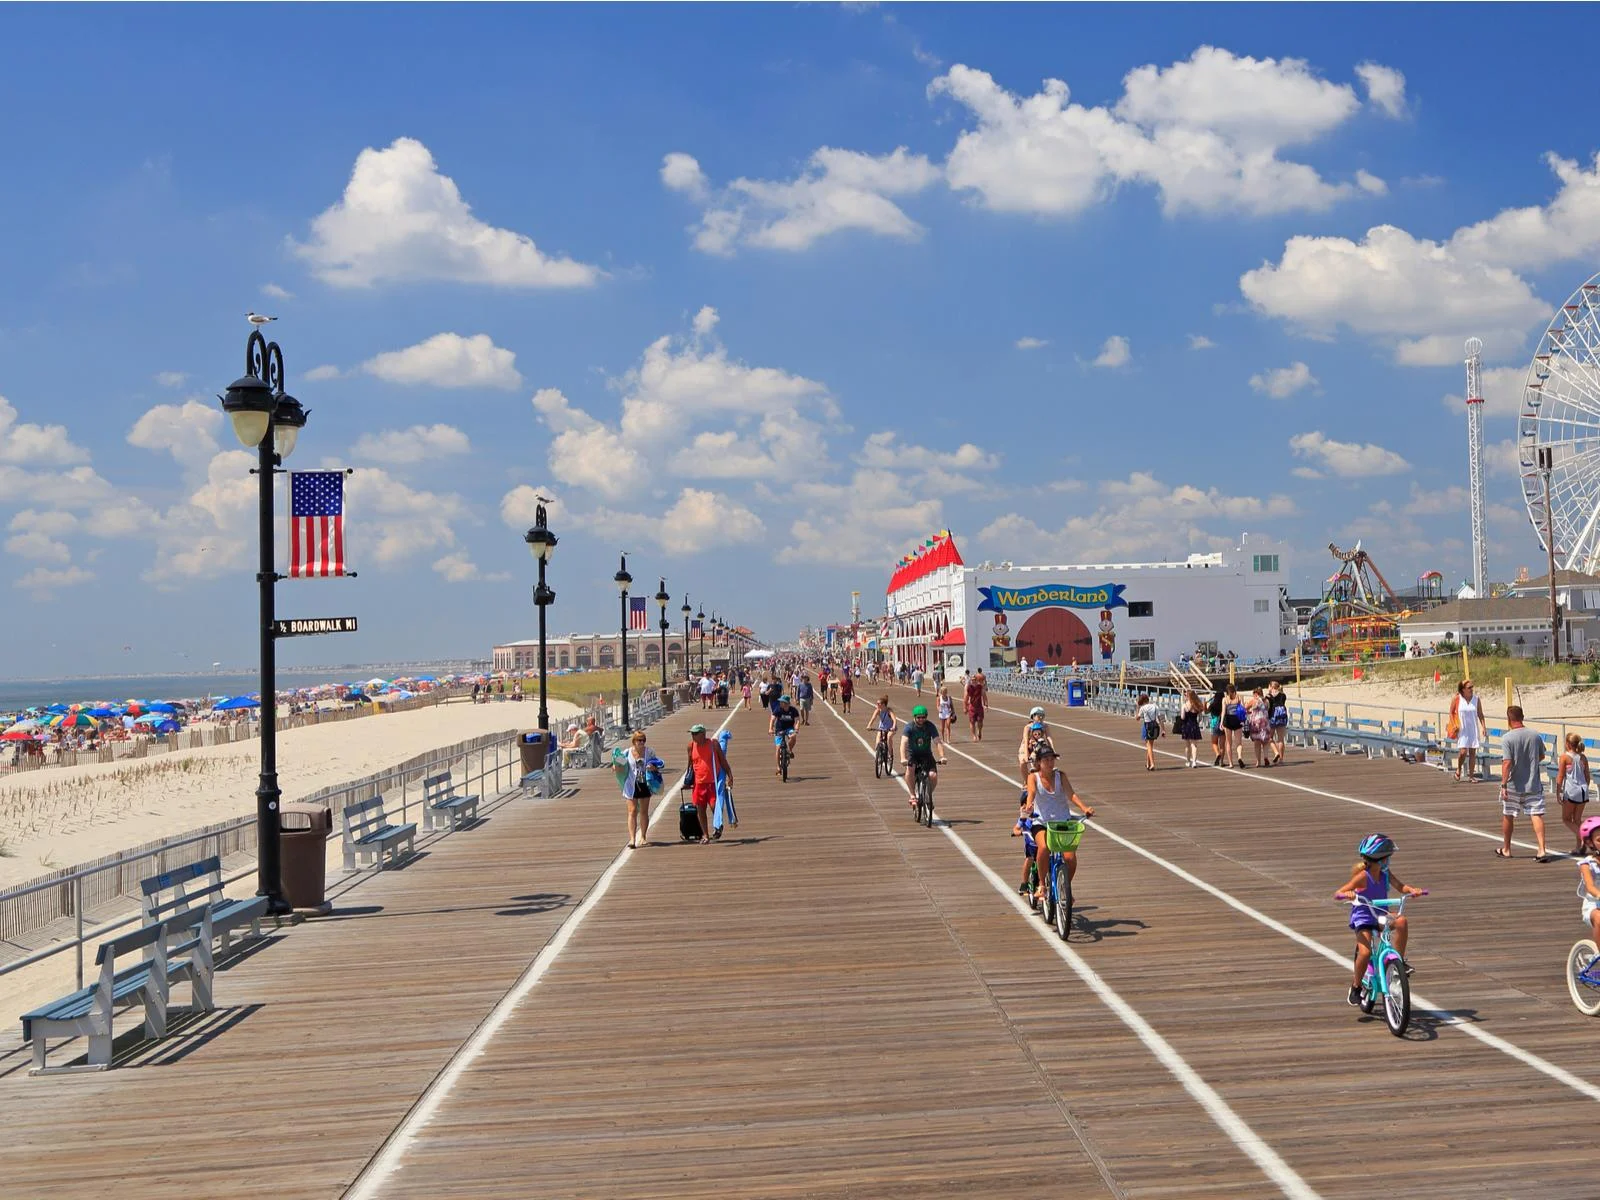 Children and adults biking along the famous wide board at Ocean City in New Jersey, a piece on the best beaches on the East Coast, with fun amusement park on one side and busy beach on the other